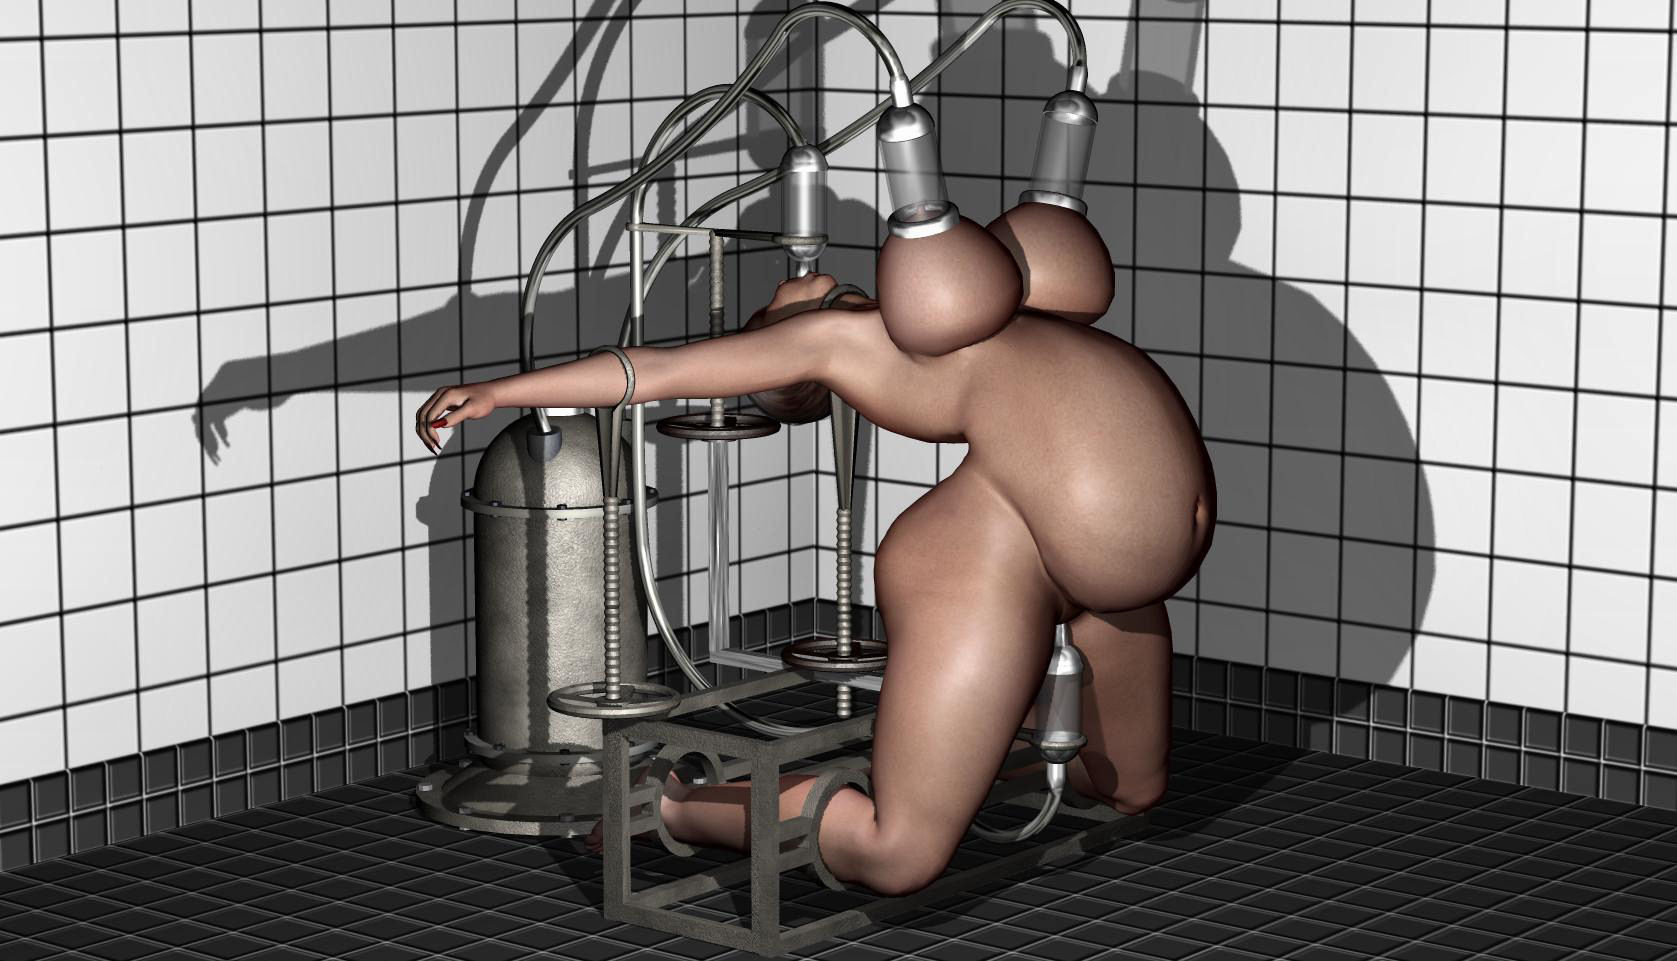 Nepiophile Porn Spanking - Free 3d cartoon and 3d comics porn galleries